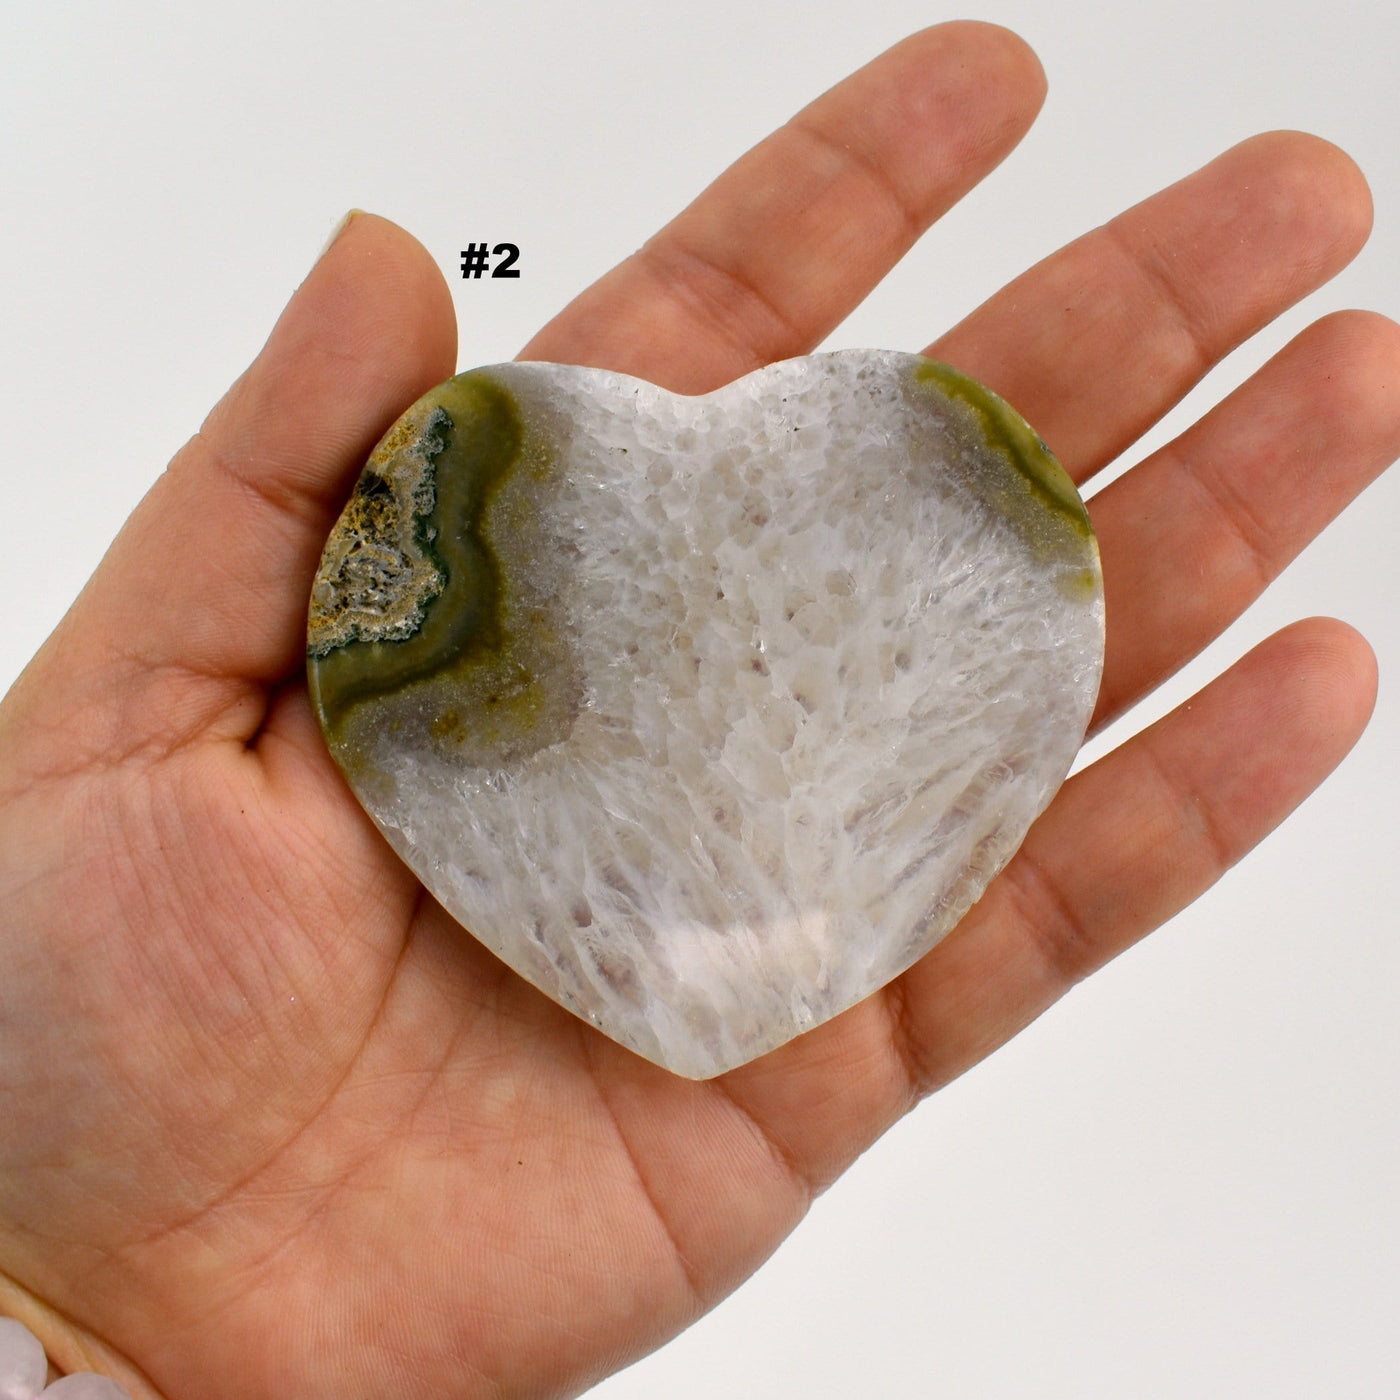 Agate heart slice #2 in a hand with a white background.